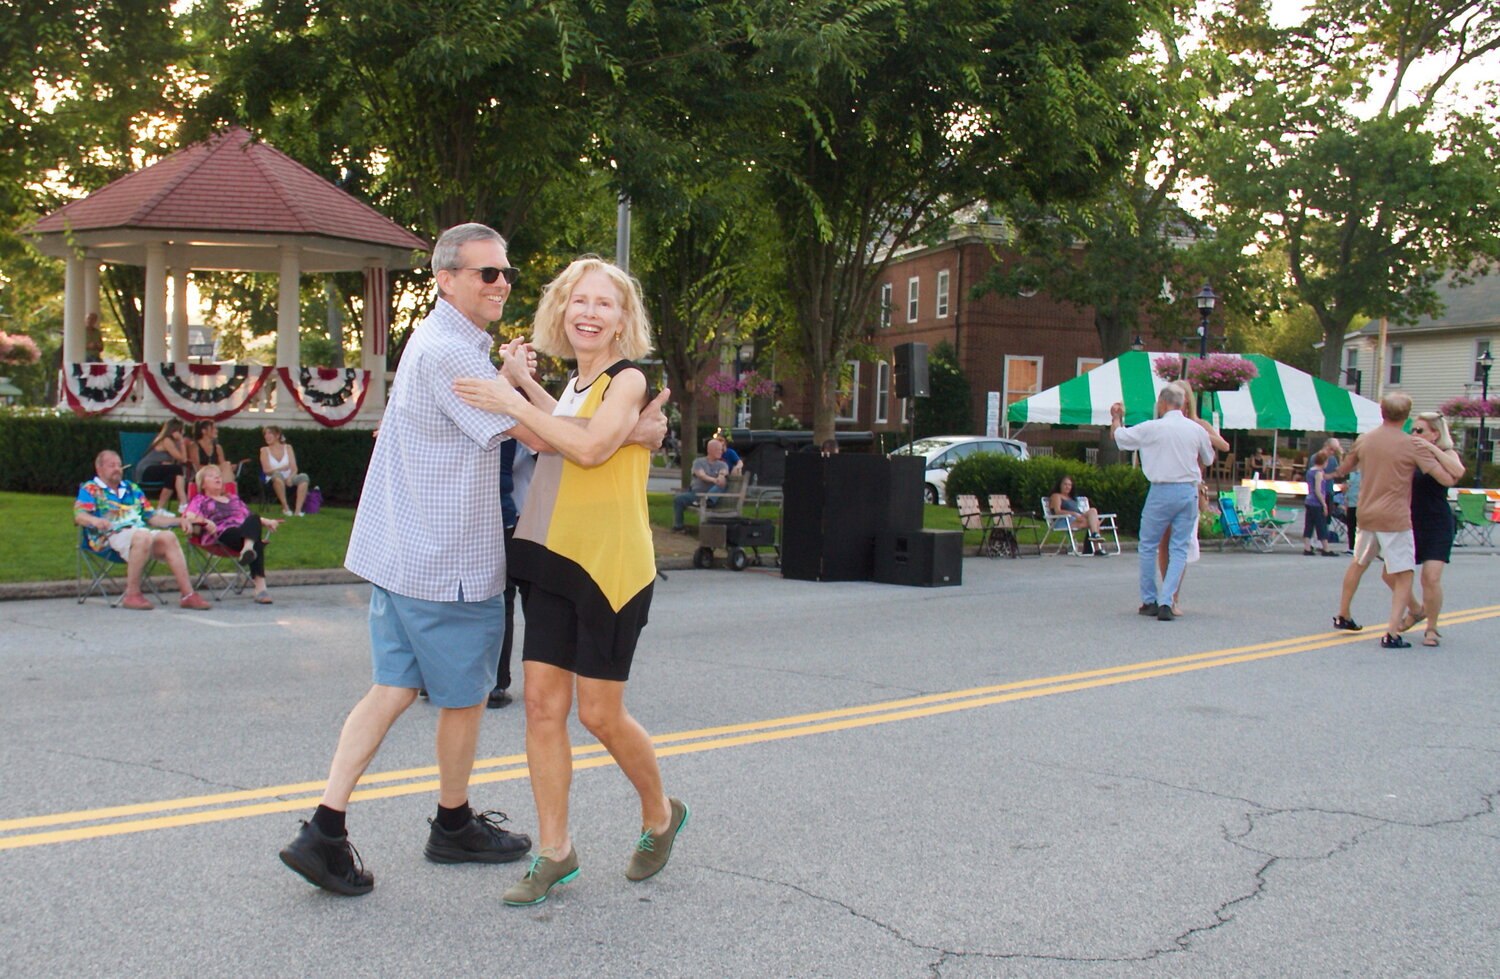 Couples danced the waltz at Dancing in the Street.